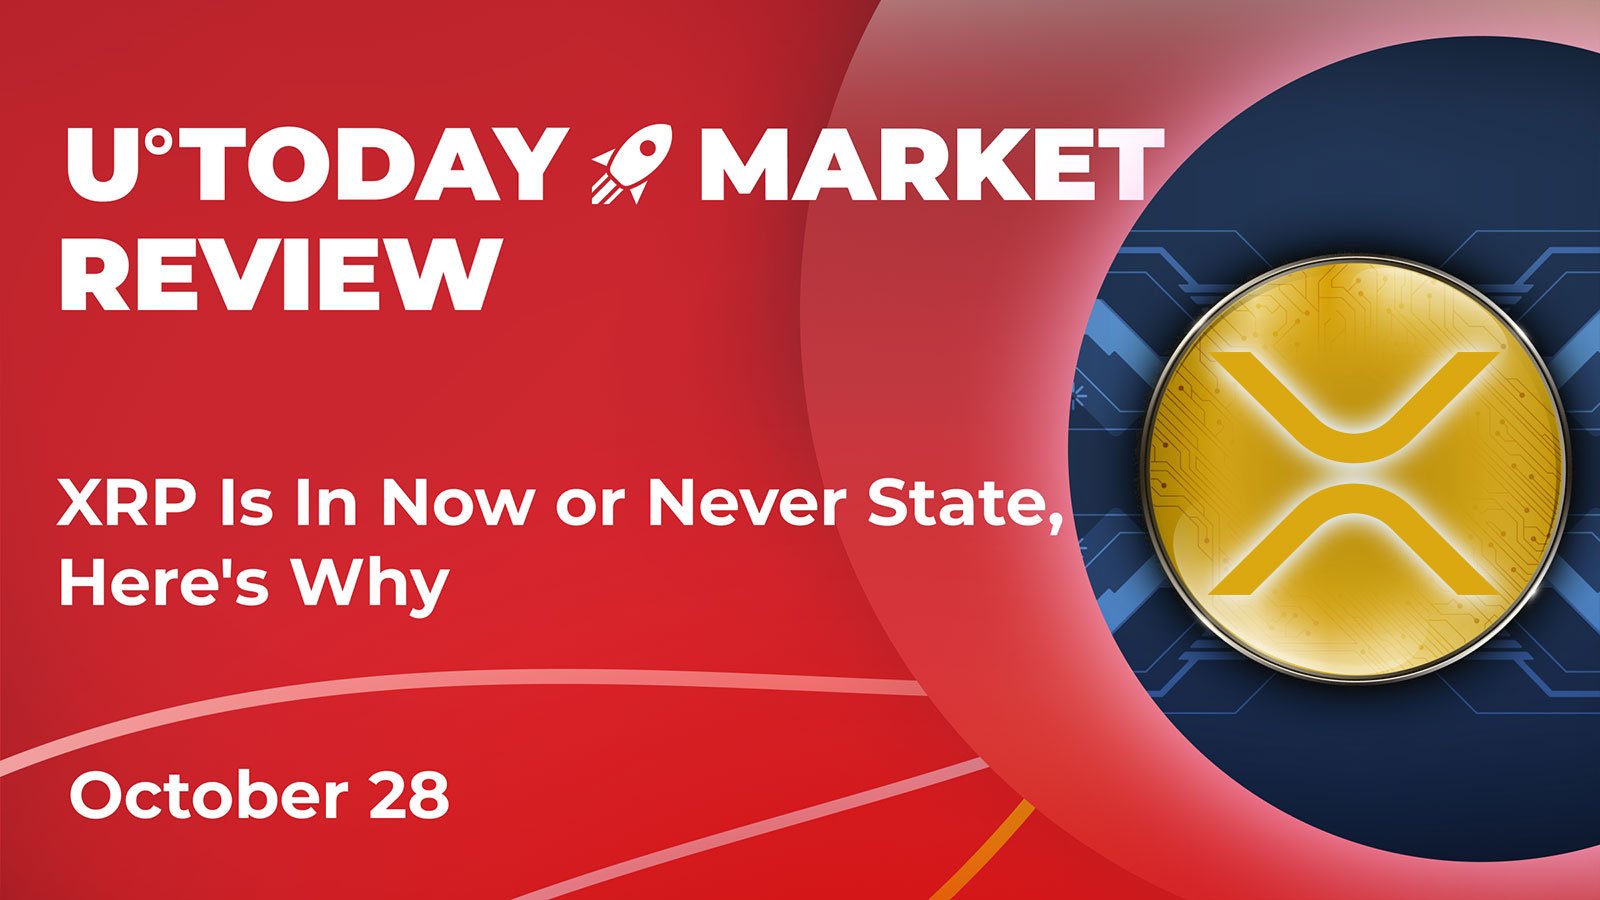 XRP Is In Now or Never State, Here's Why: Crypto Market Review, October 28